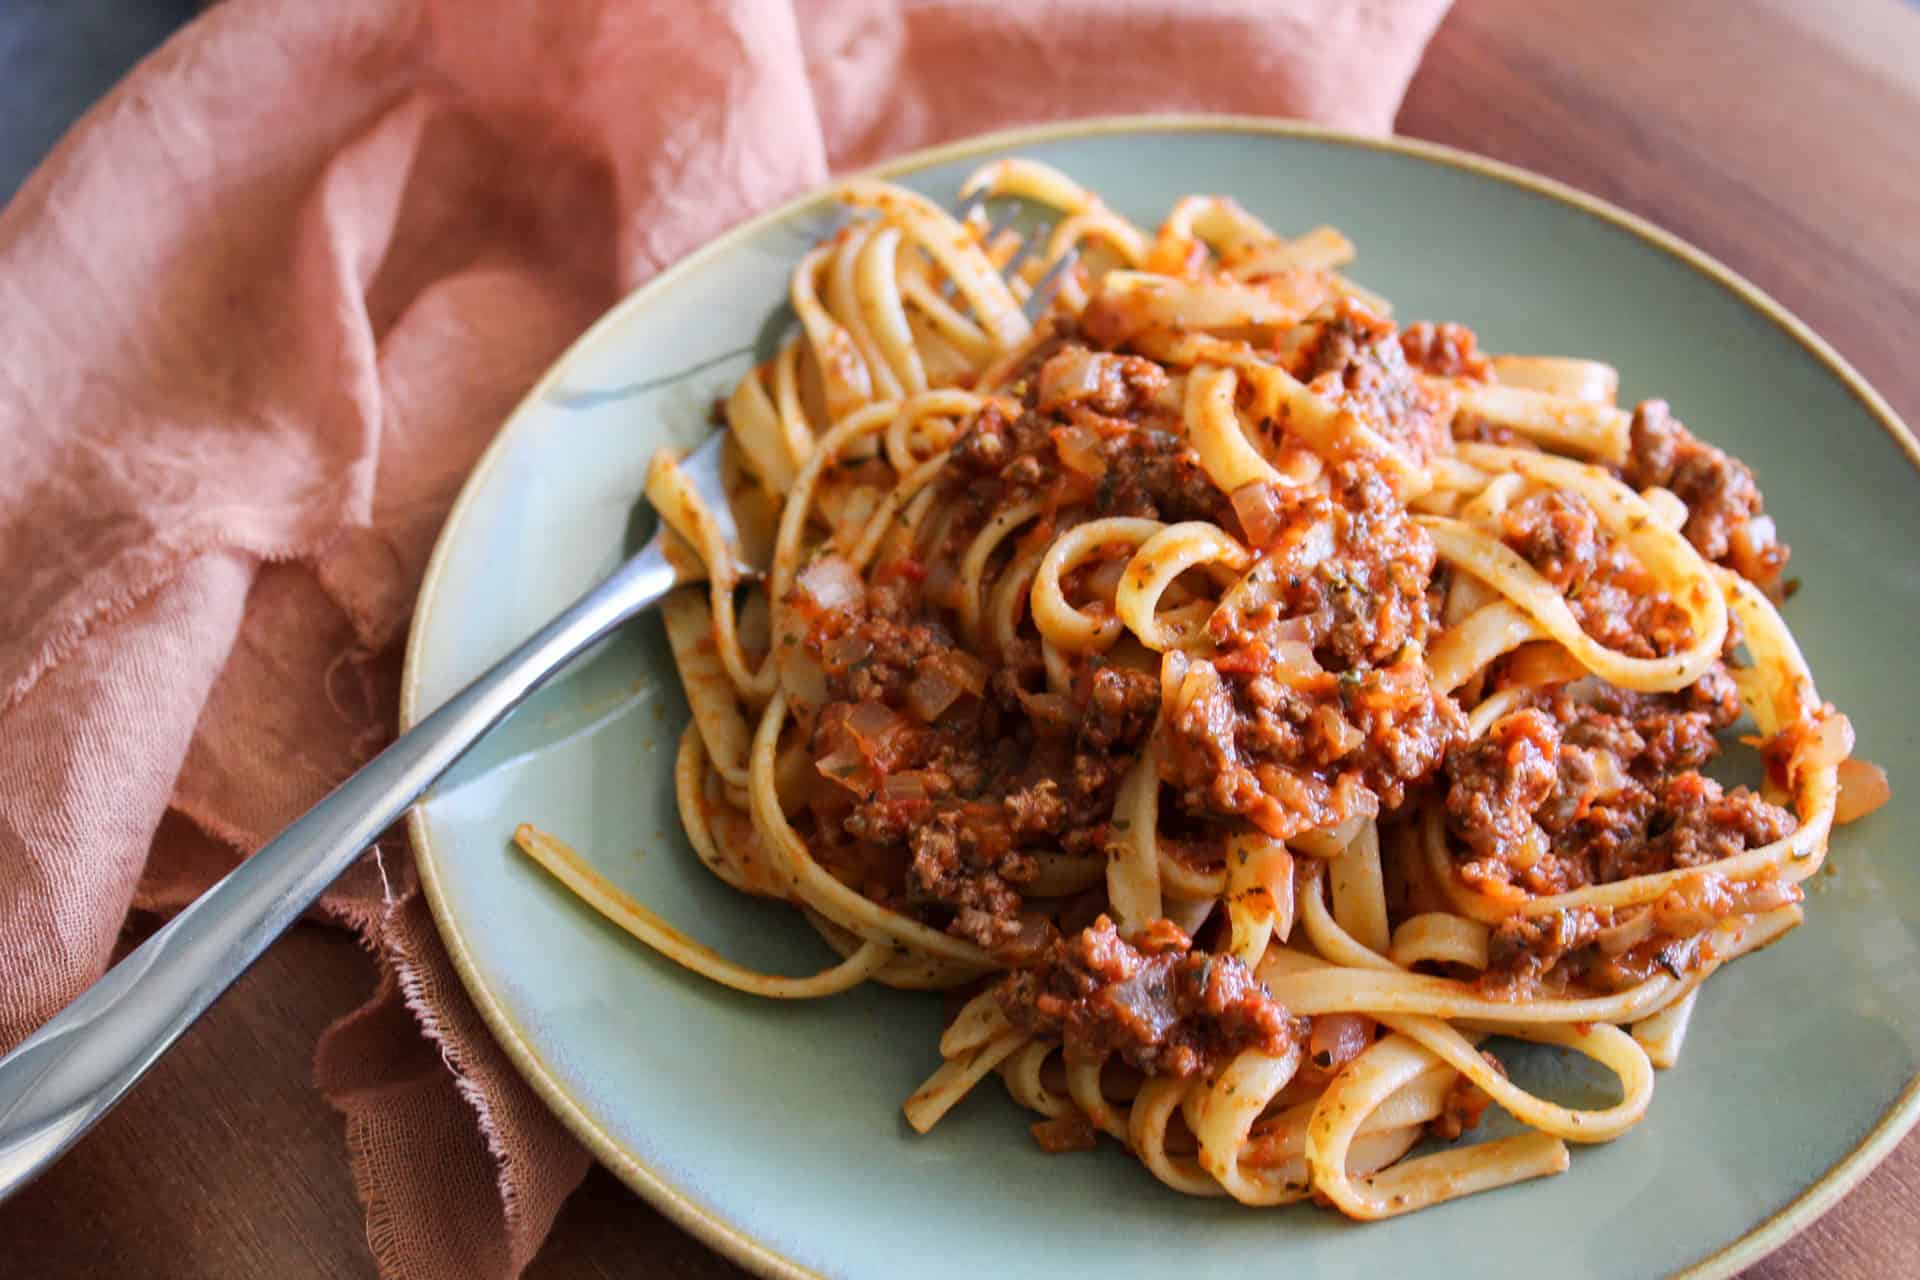 A plate of fettuccine with Italian meat sauce